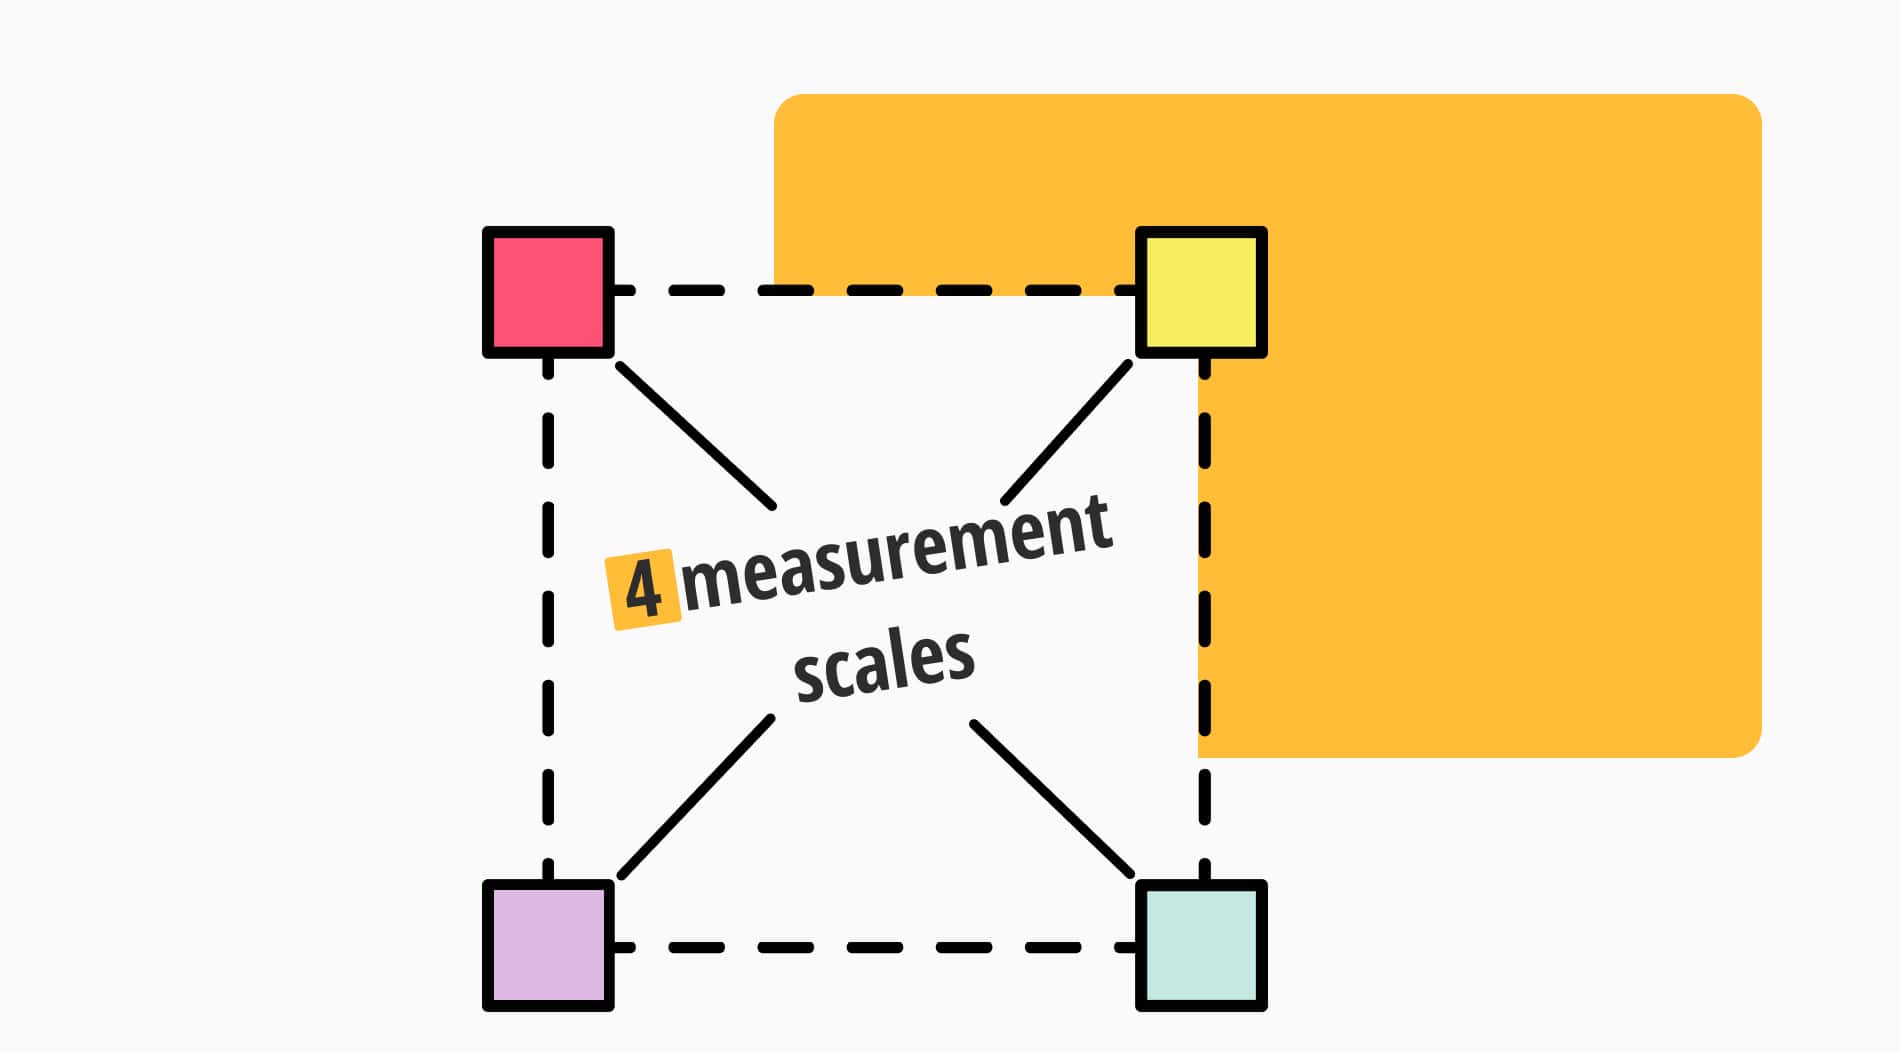 Researcher's guide to 4 measurement scales: Nominal, ordinal, interval, ratio